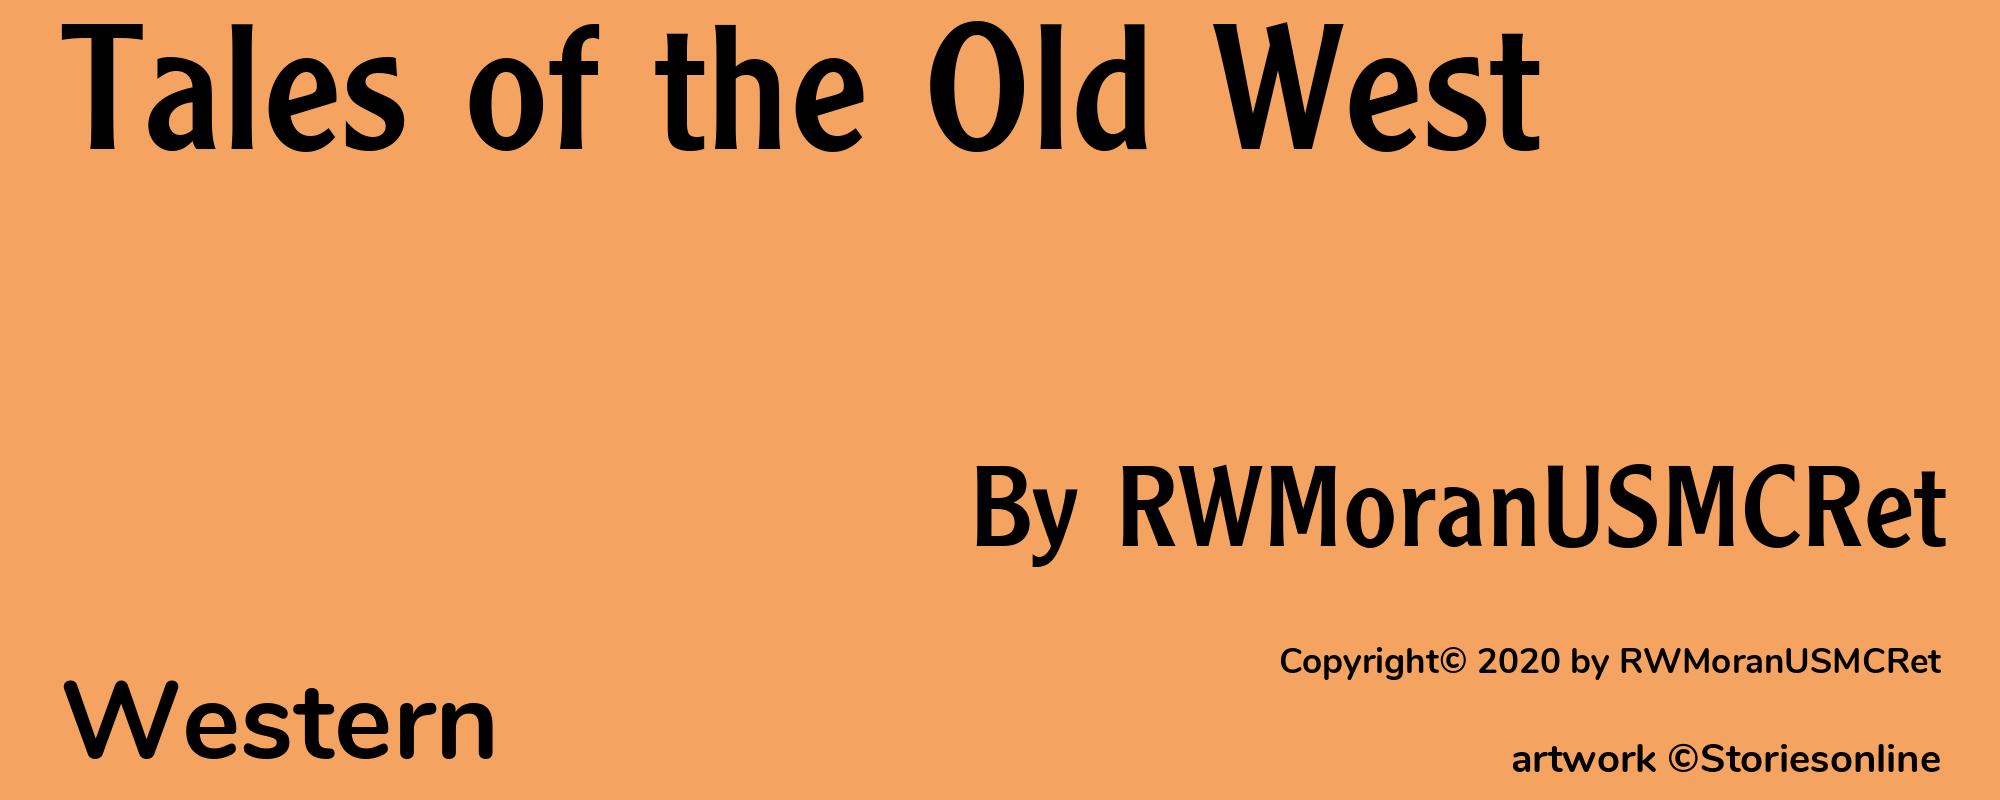 Tales of the Old West - Cover